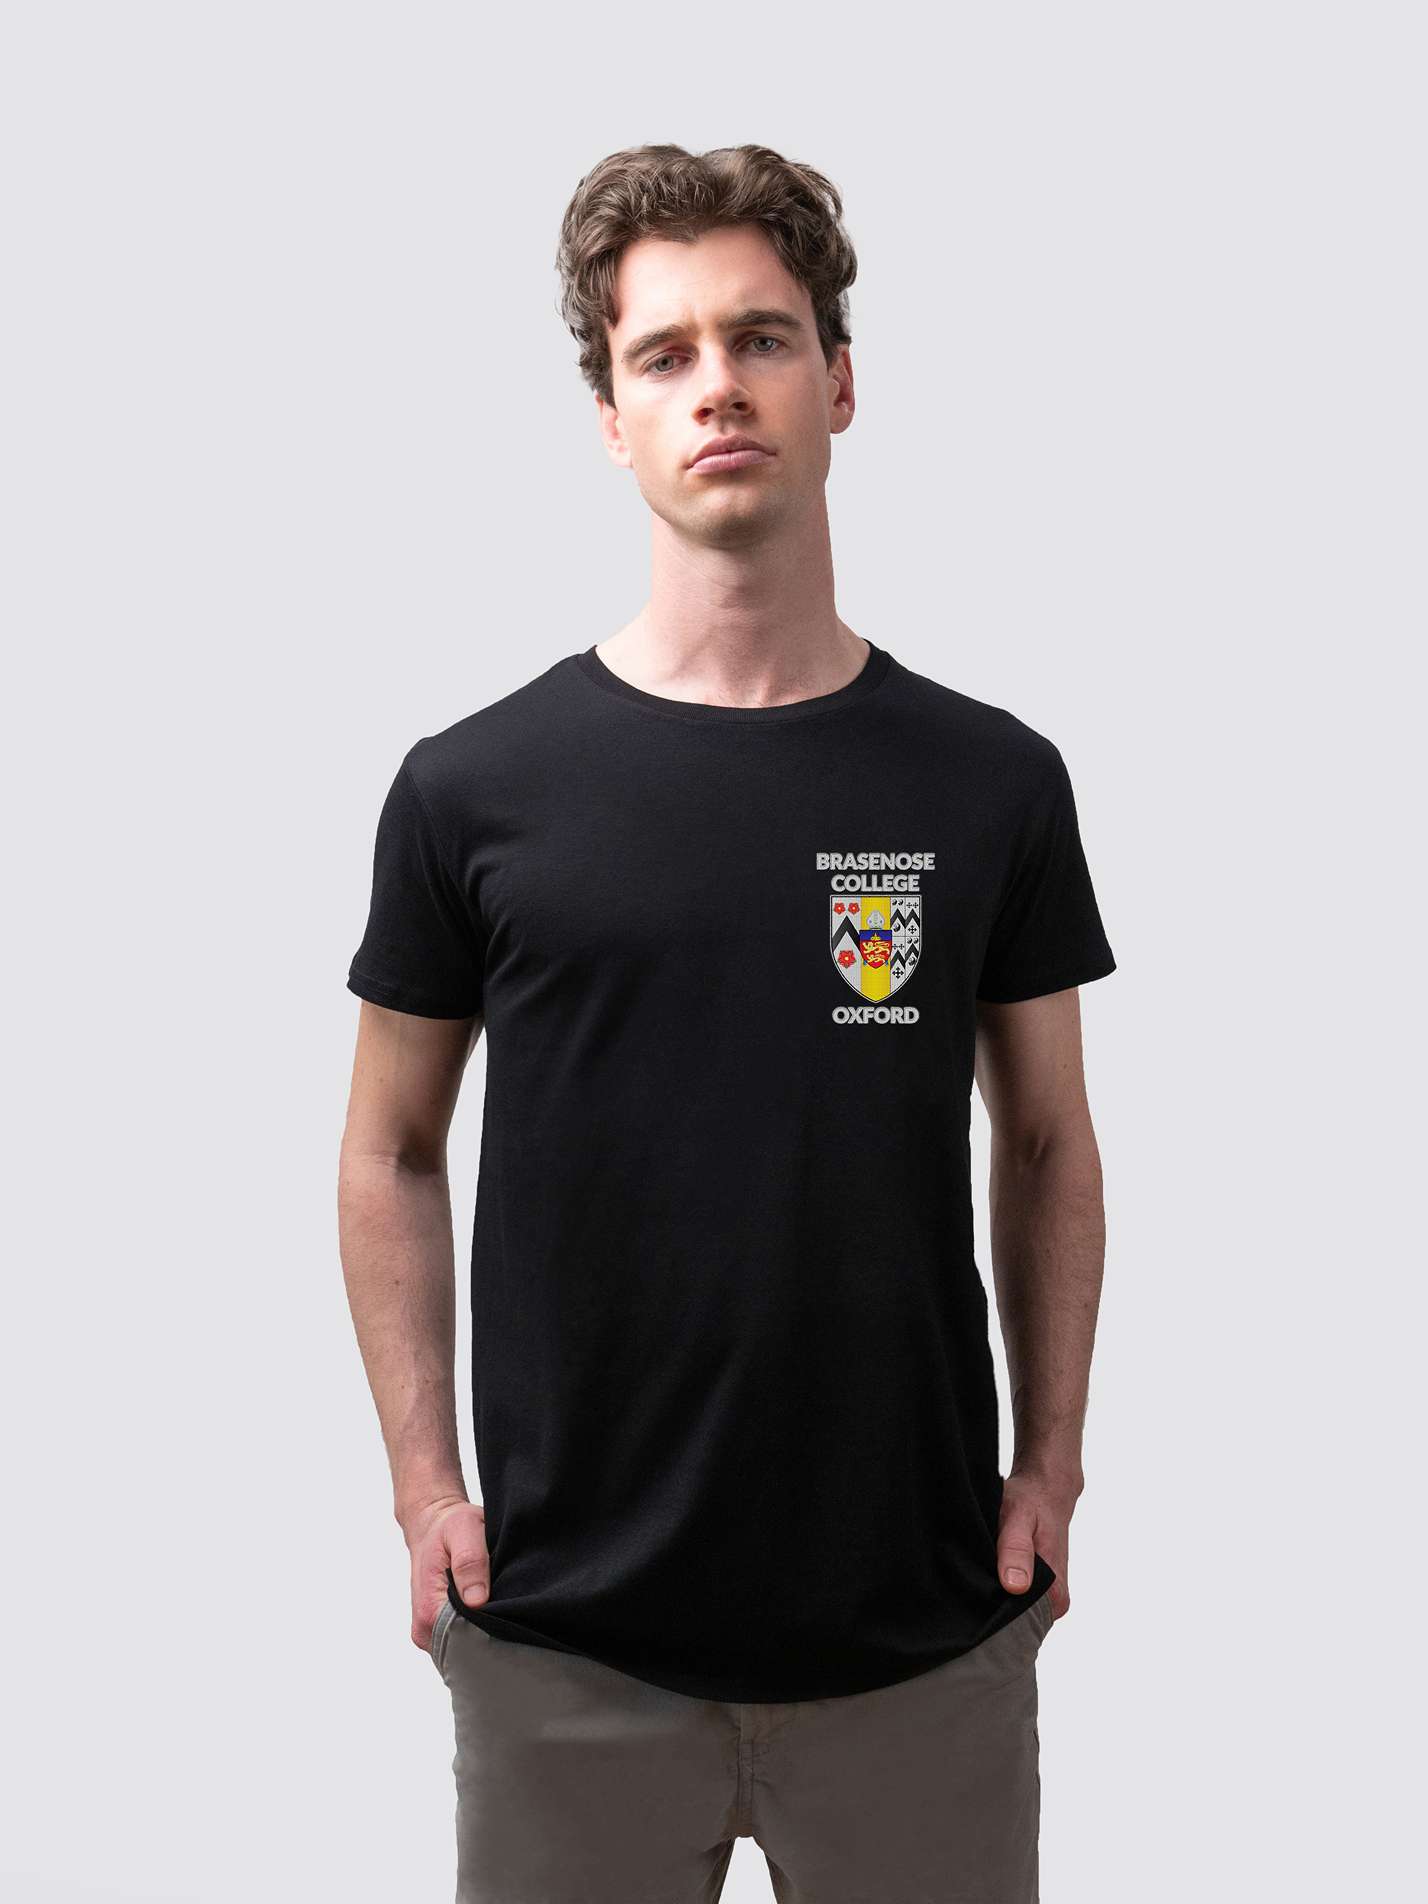 Sustainable Brasenose t-shirt, made from organic cotton